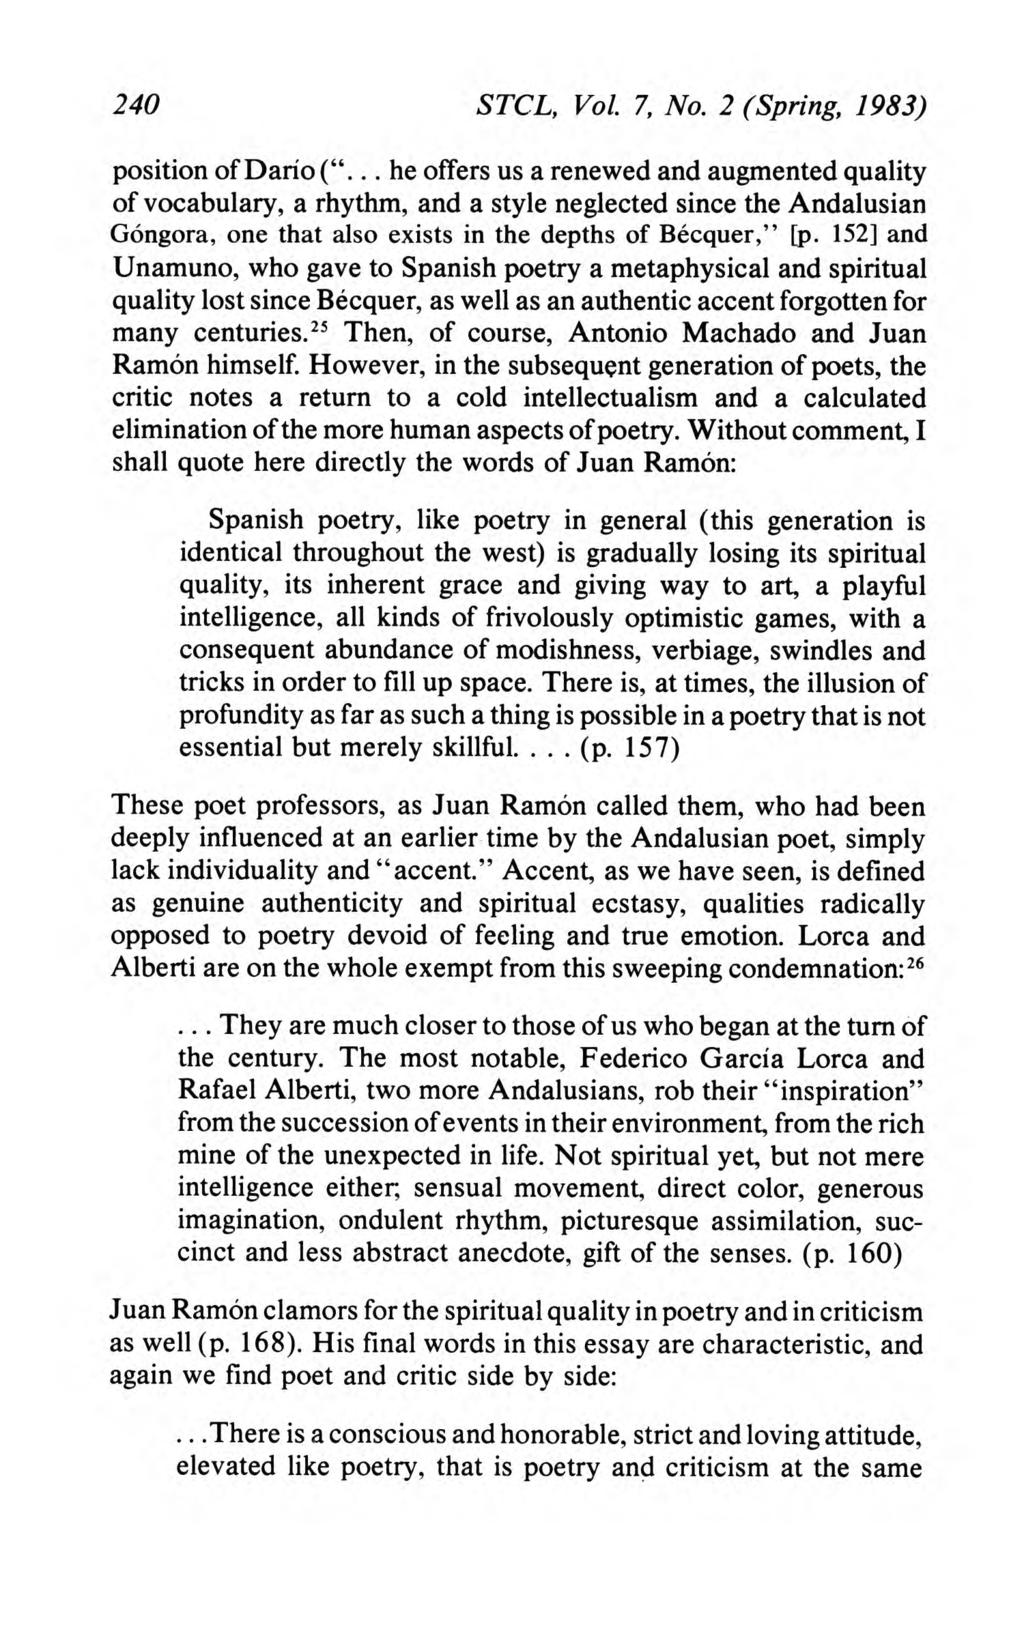 Studies in 20th & 21st Century Literature, Vol. 7, Iss. 2 [1983], Art. 9 240 STCL, Vol. 7, No. 2 (Spring, 1983) position of Dario (".